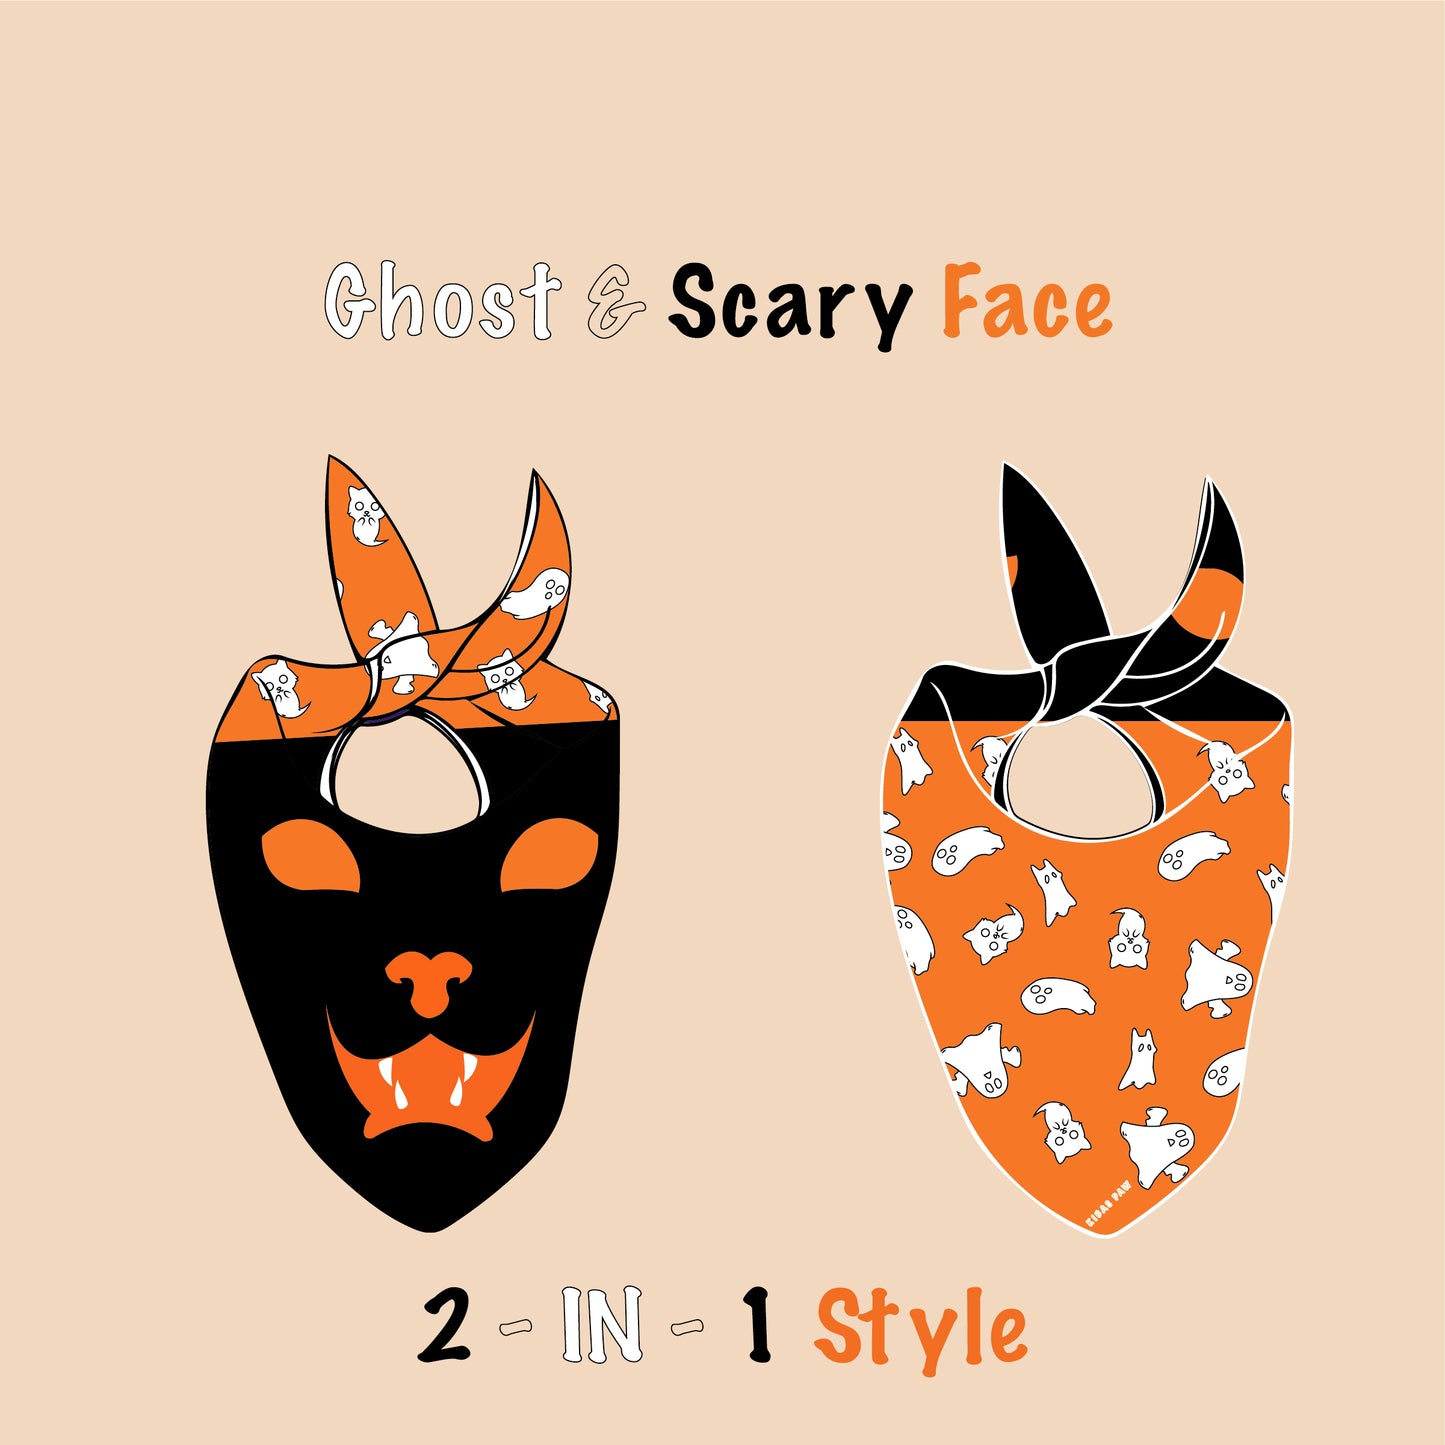 Ghost & Scary Face